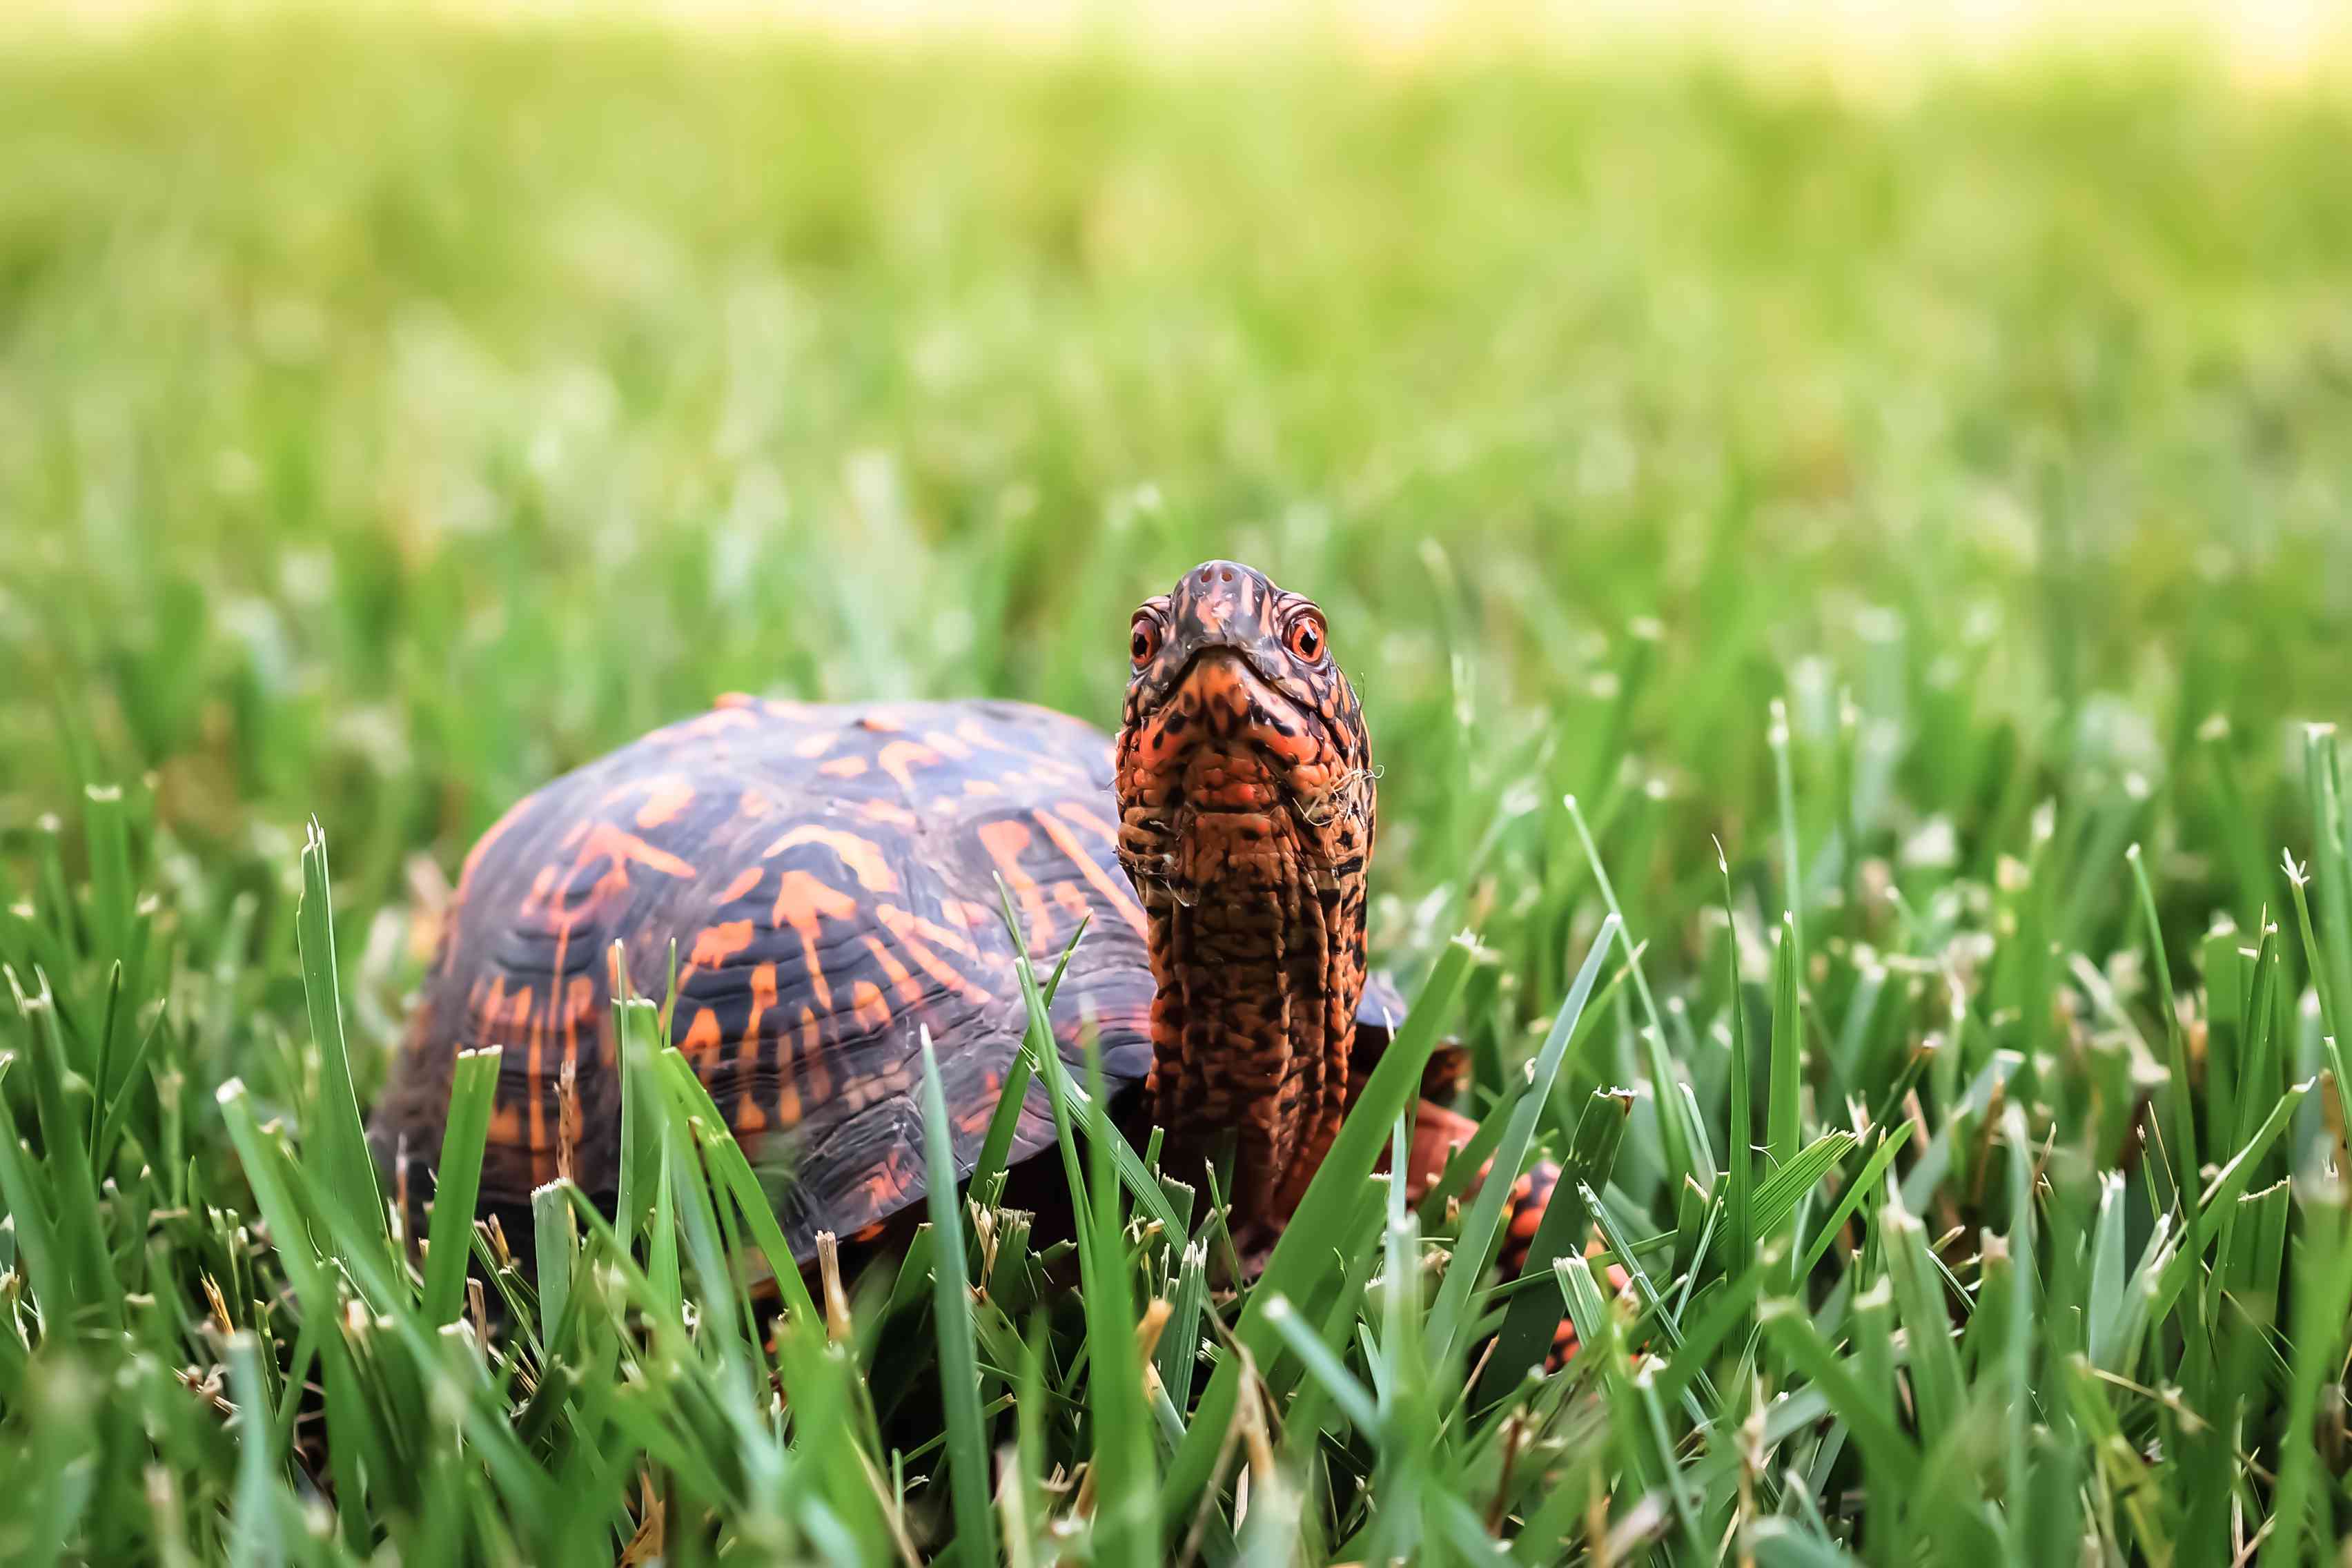 Eastern Box Turtle with stretched neck in grass